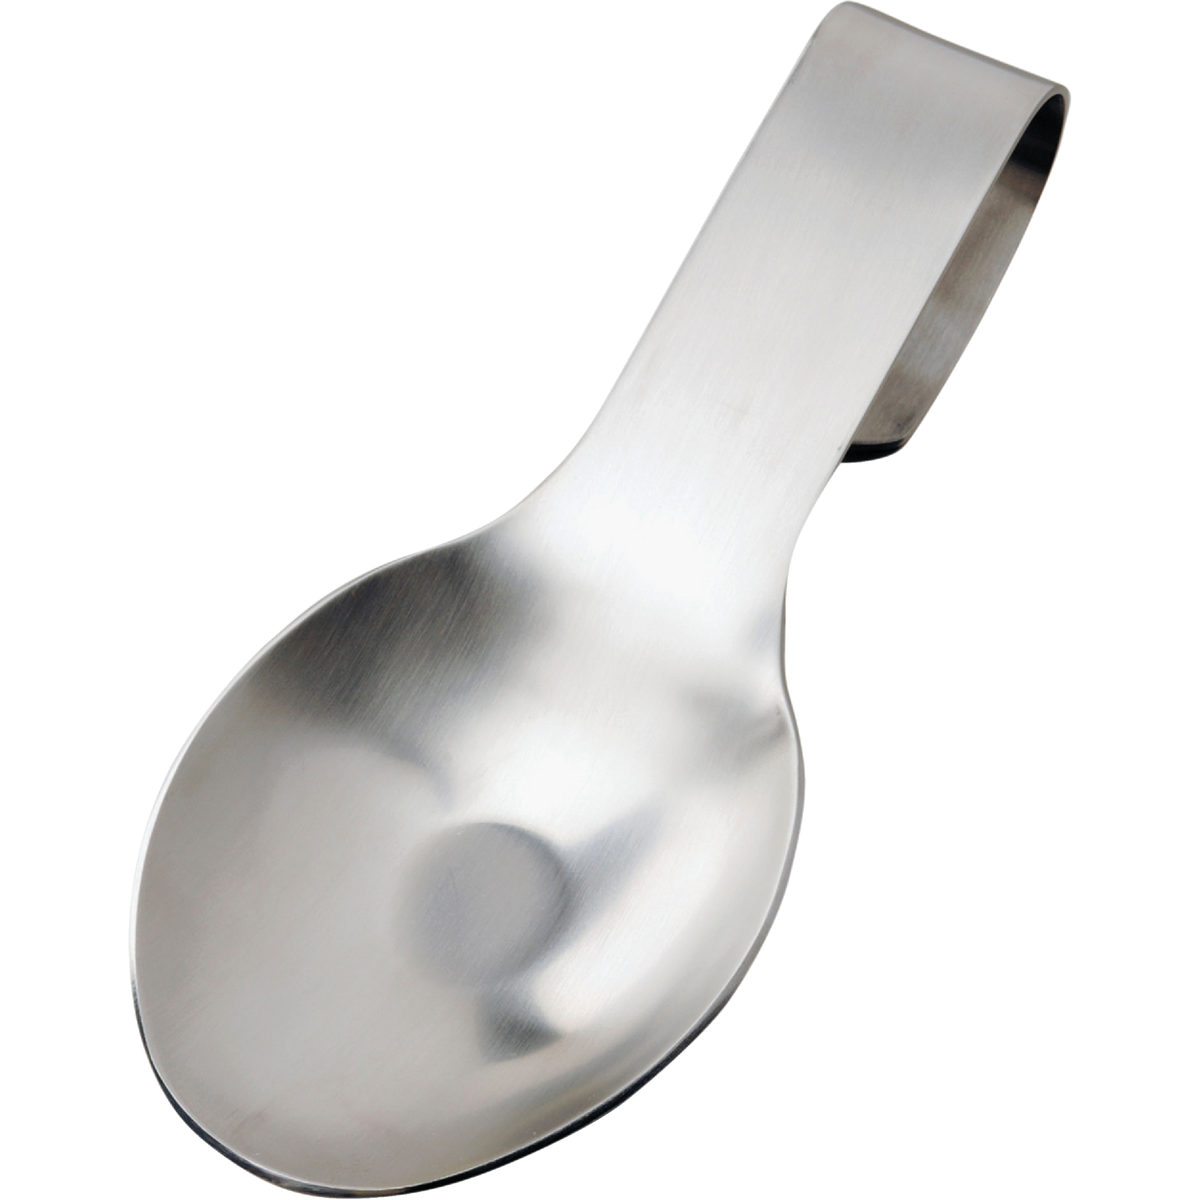 Amco Brushed Stainless Steel Spoon Rest 8158 - 1 Each | eBay Amco Stainless Steel Spoon Rest